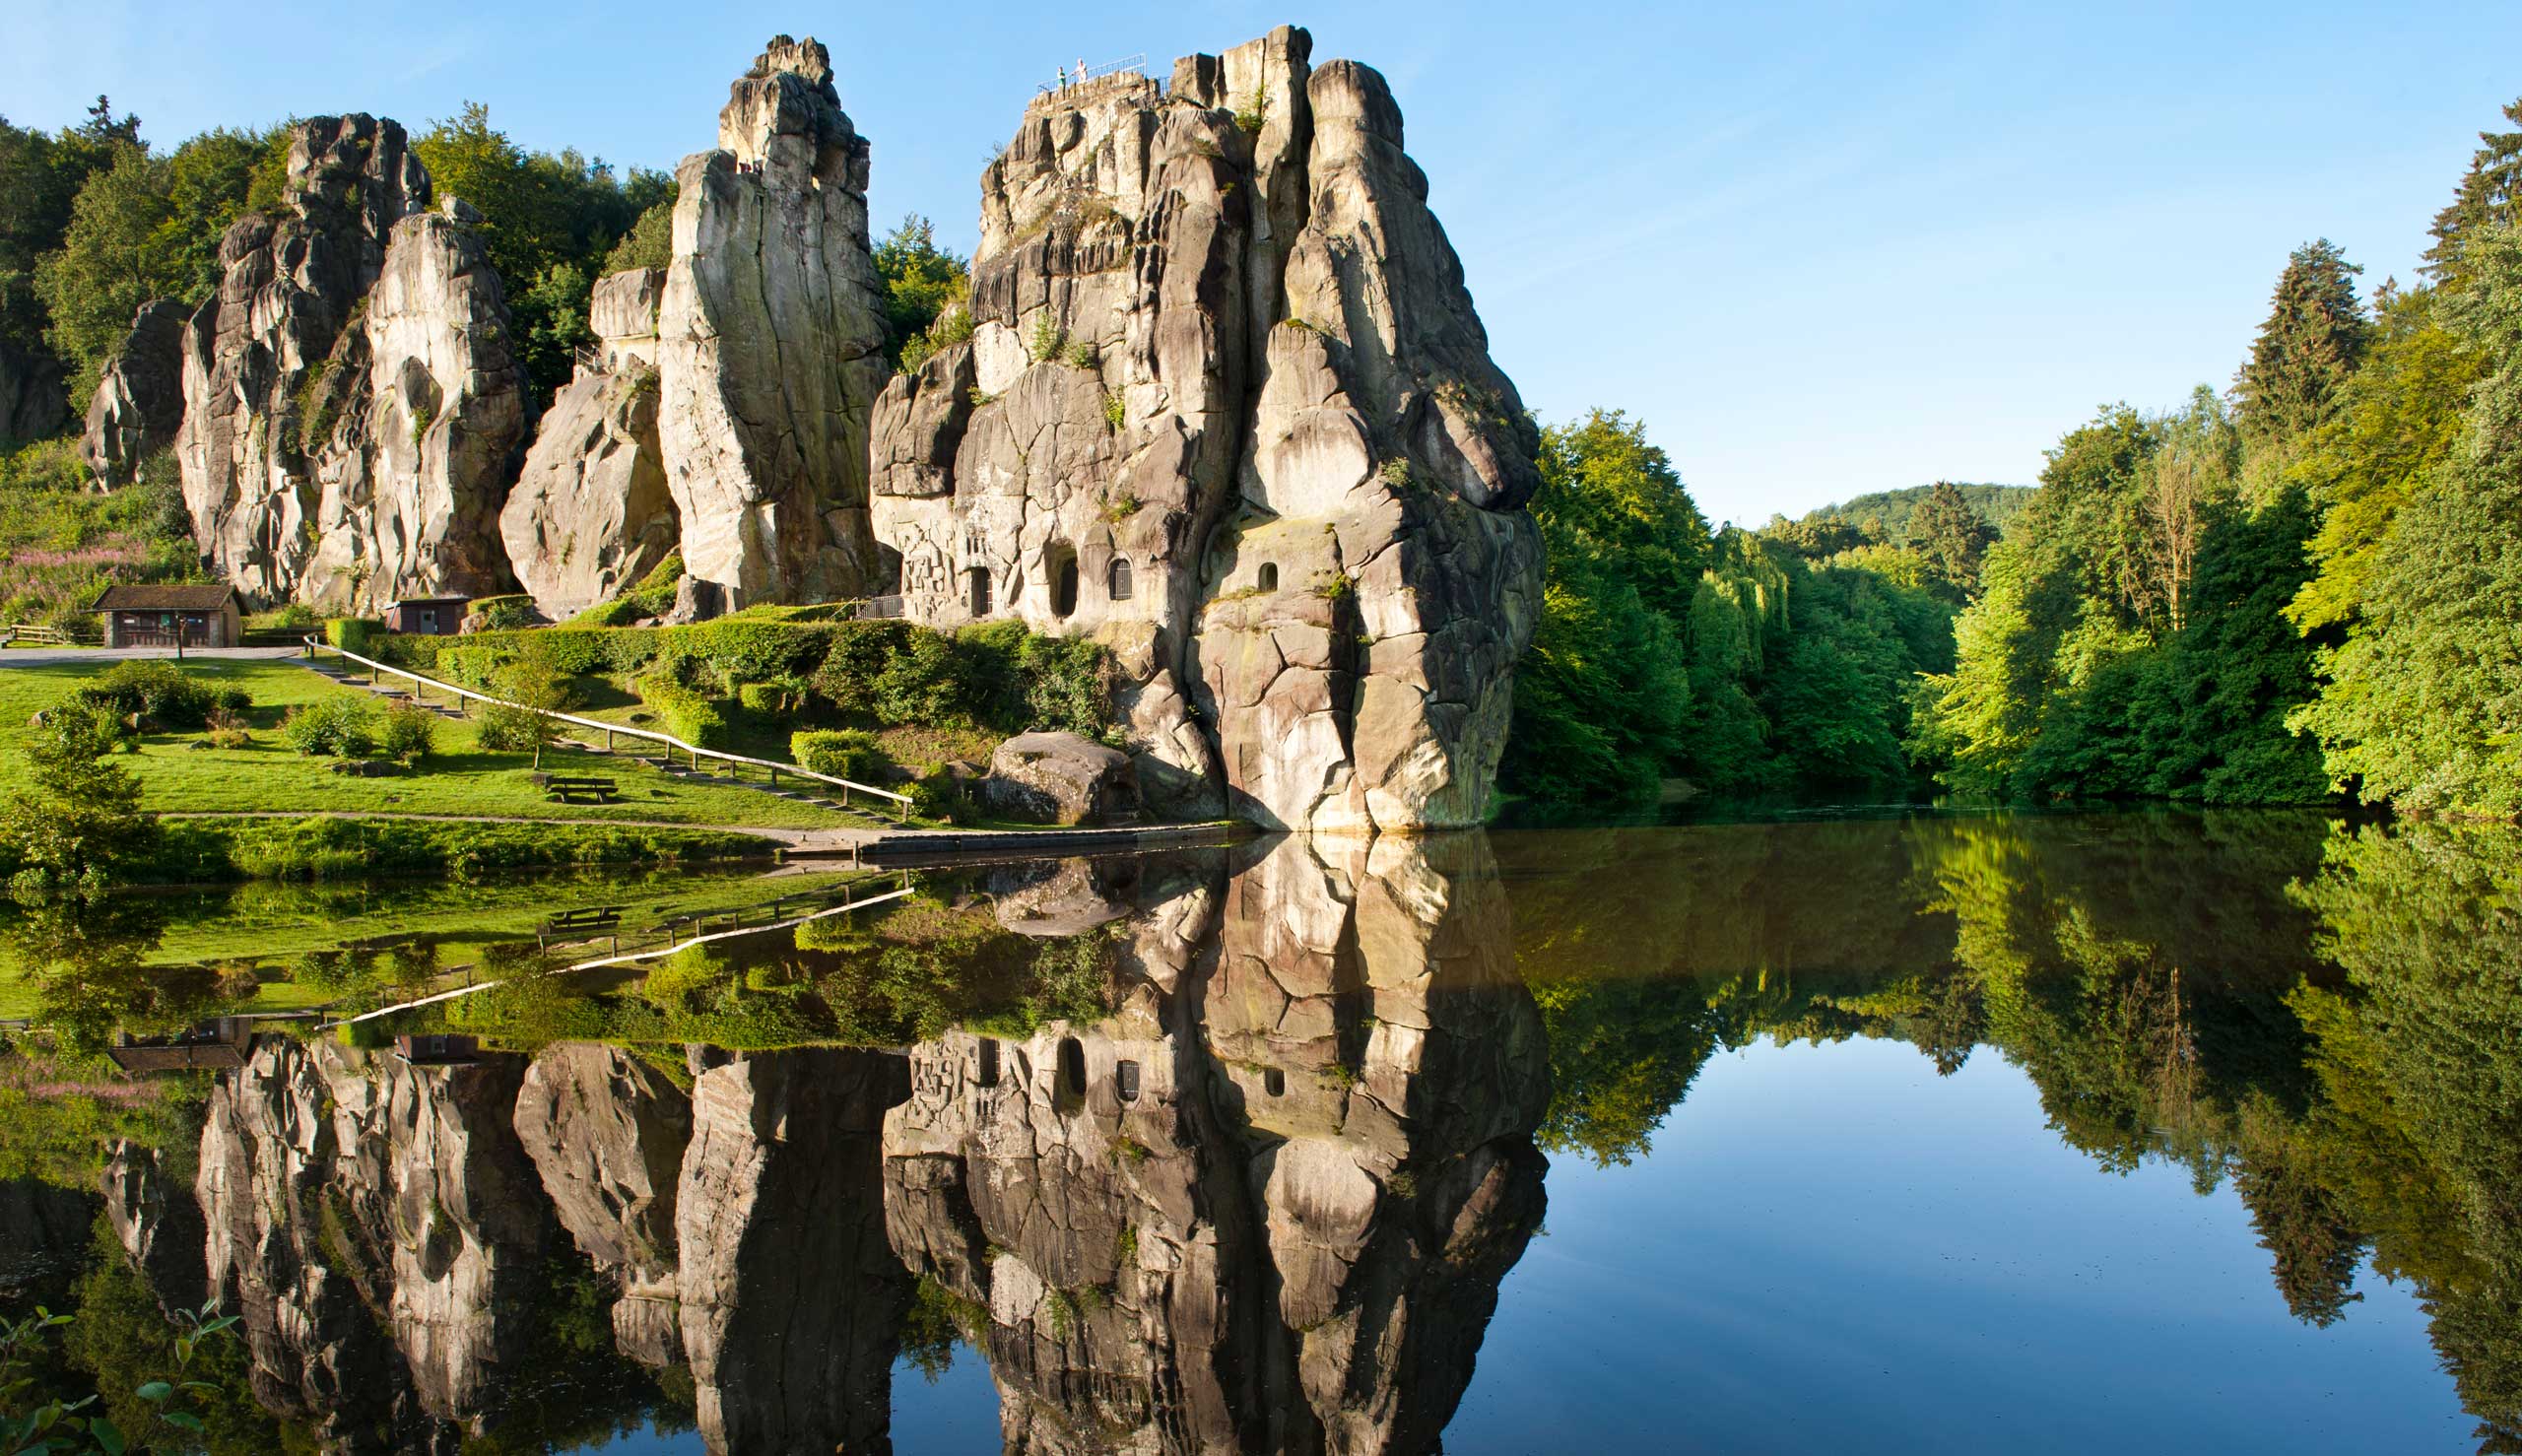 The Externsteine in the Teutoburg Forest are among the most famous sights in North Rhine-Westphalia. Copyright: Teutoburg Forest Tourism / Andreas Hub